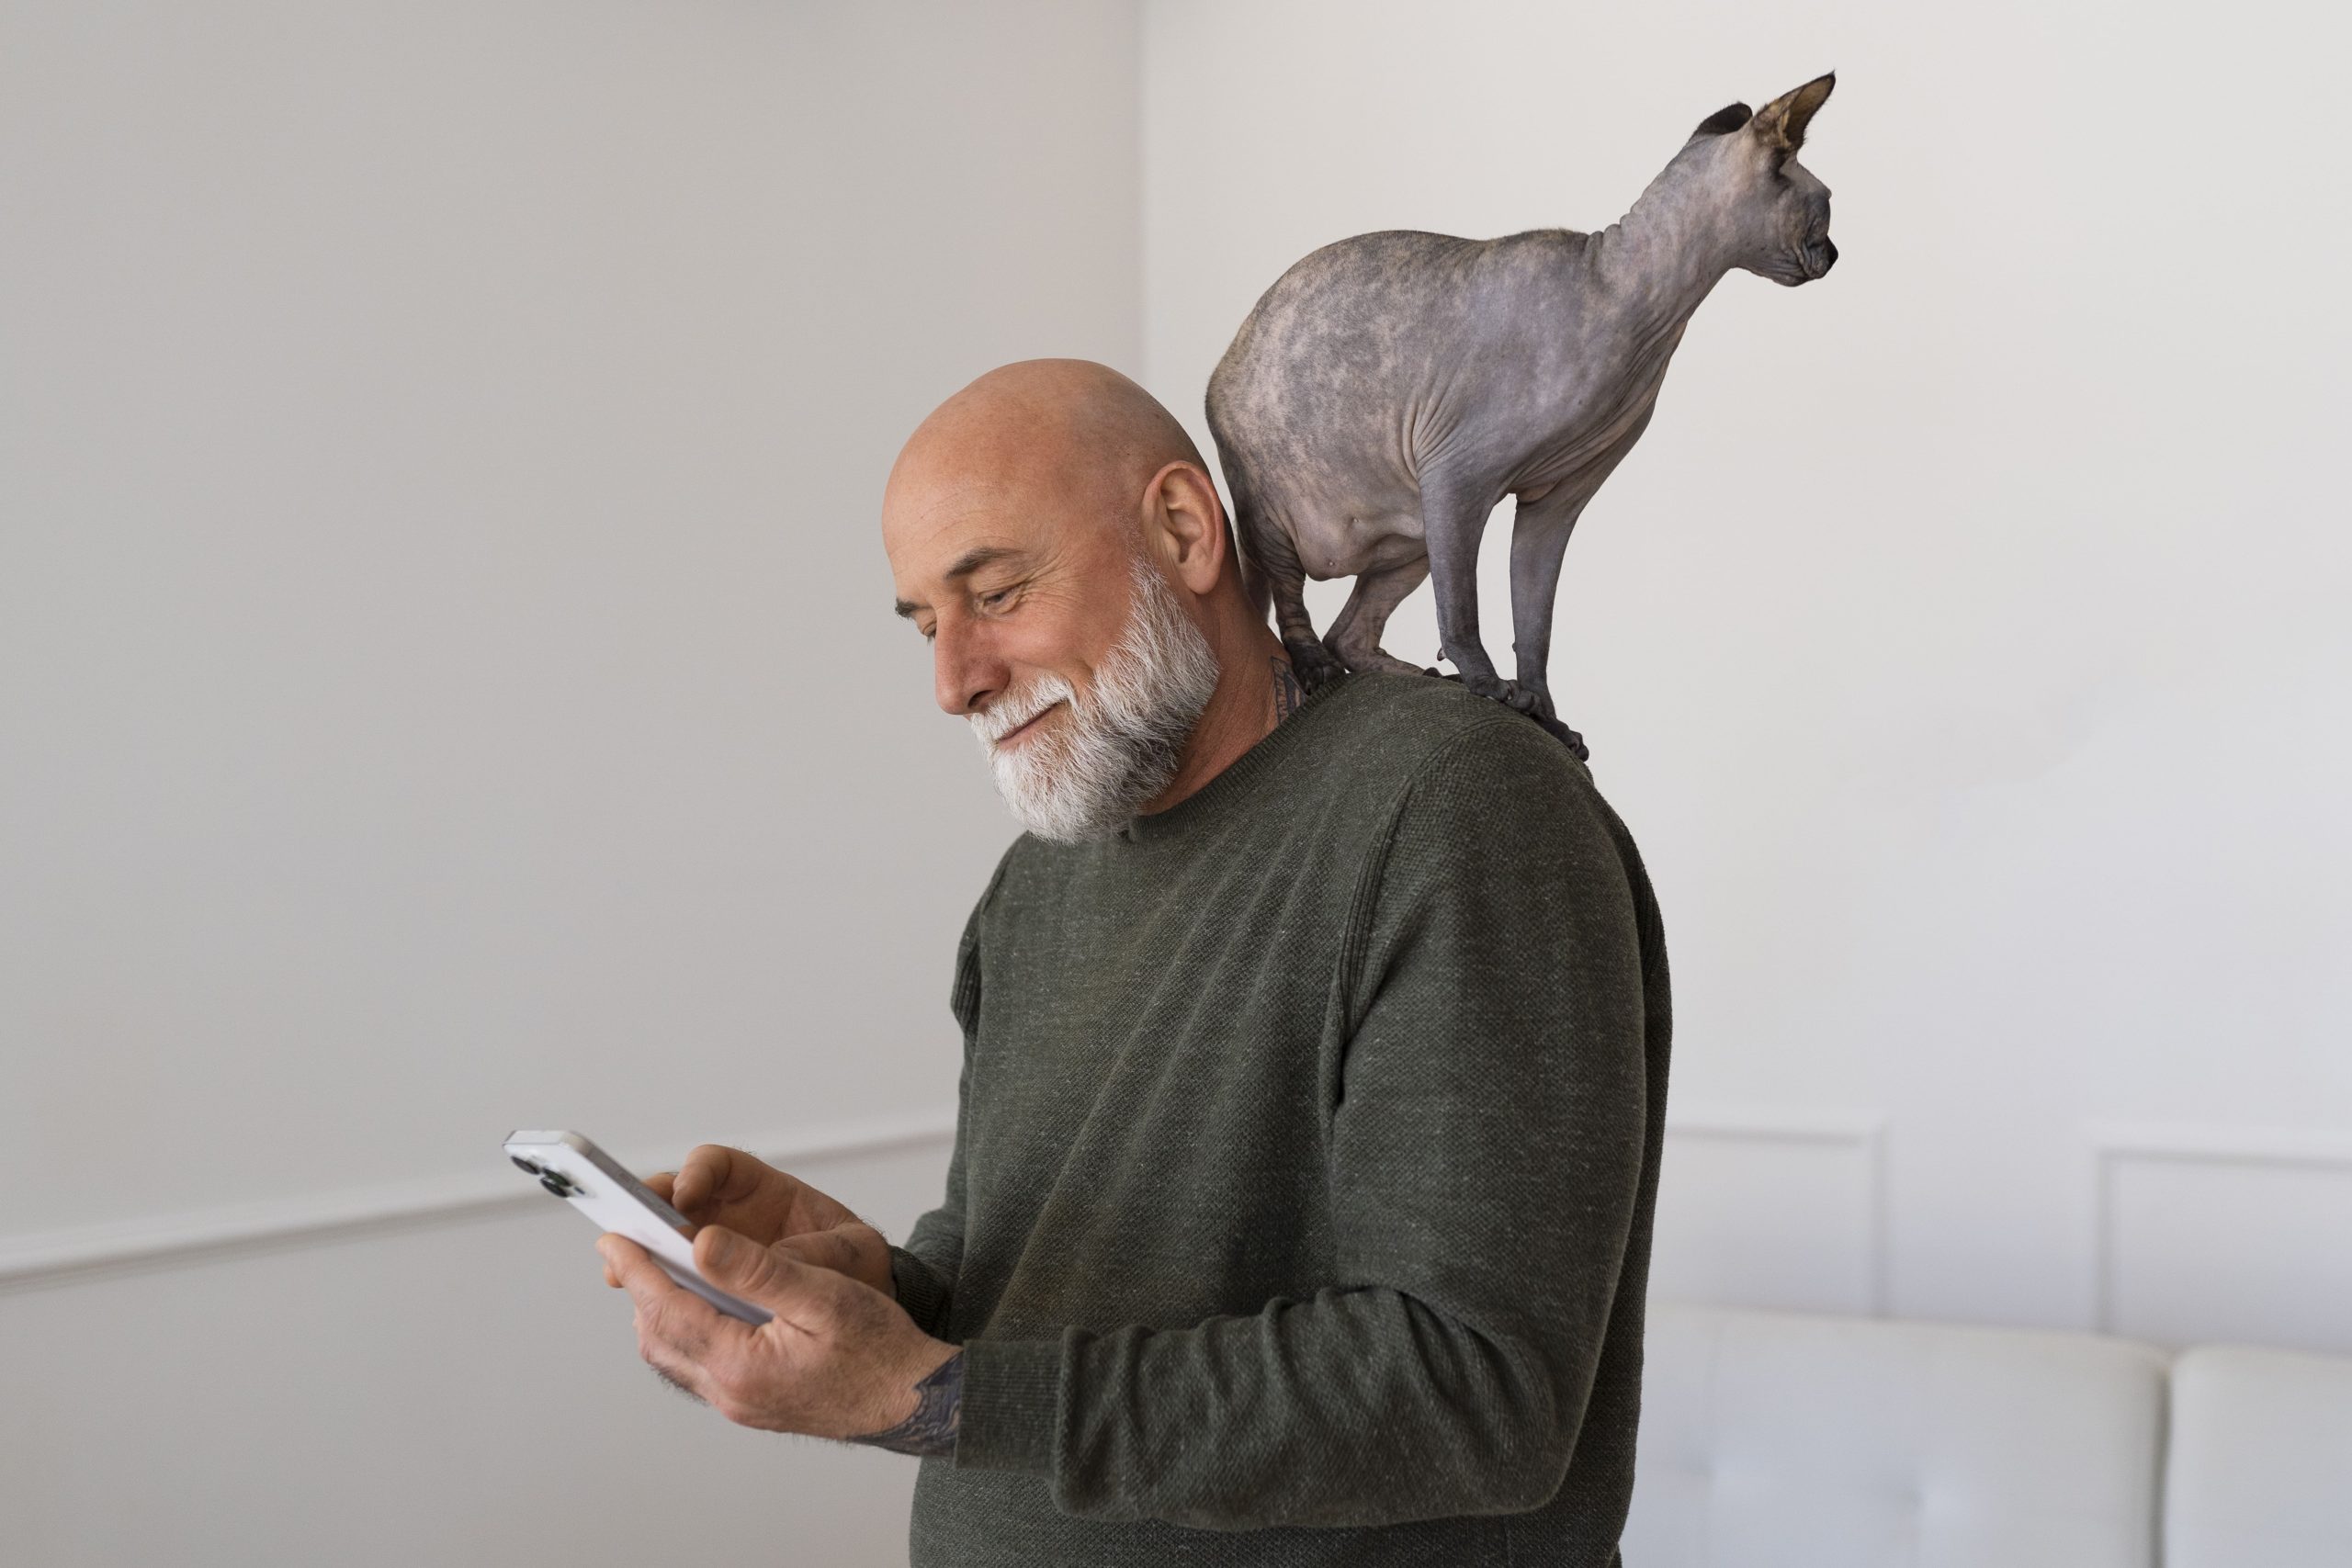 Wag caregiver checks the MileageWise Mileage Tracker App with a cat on his shoulder